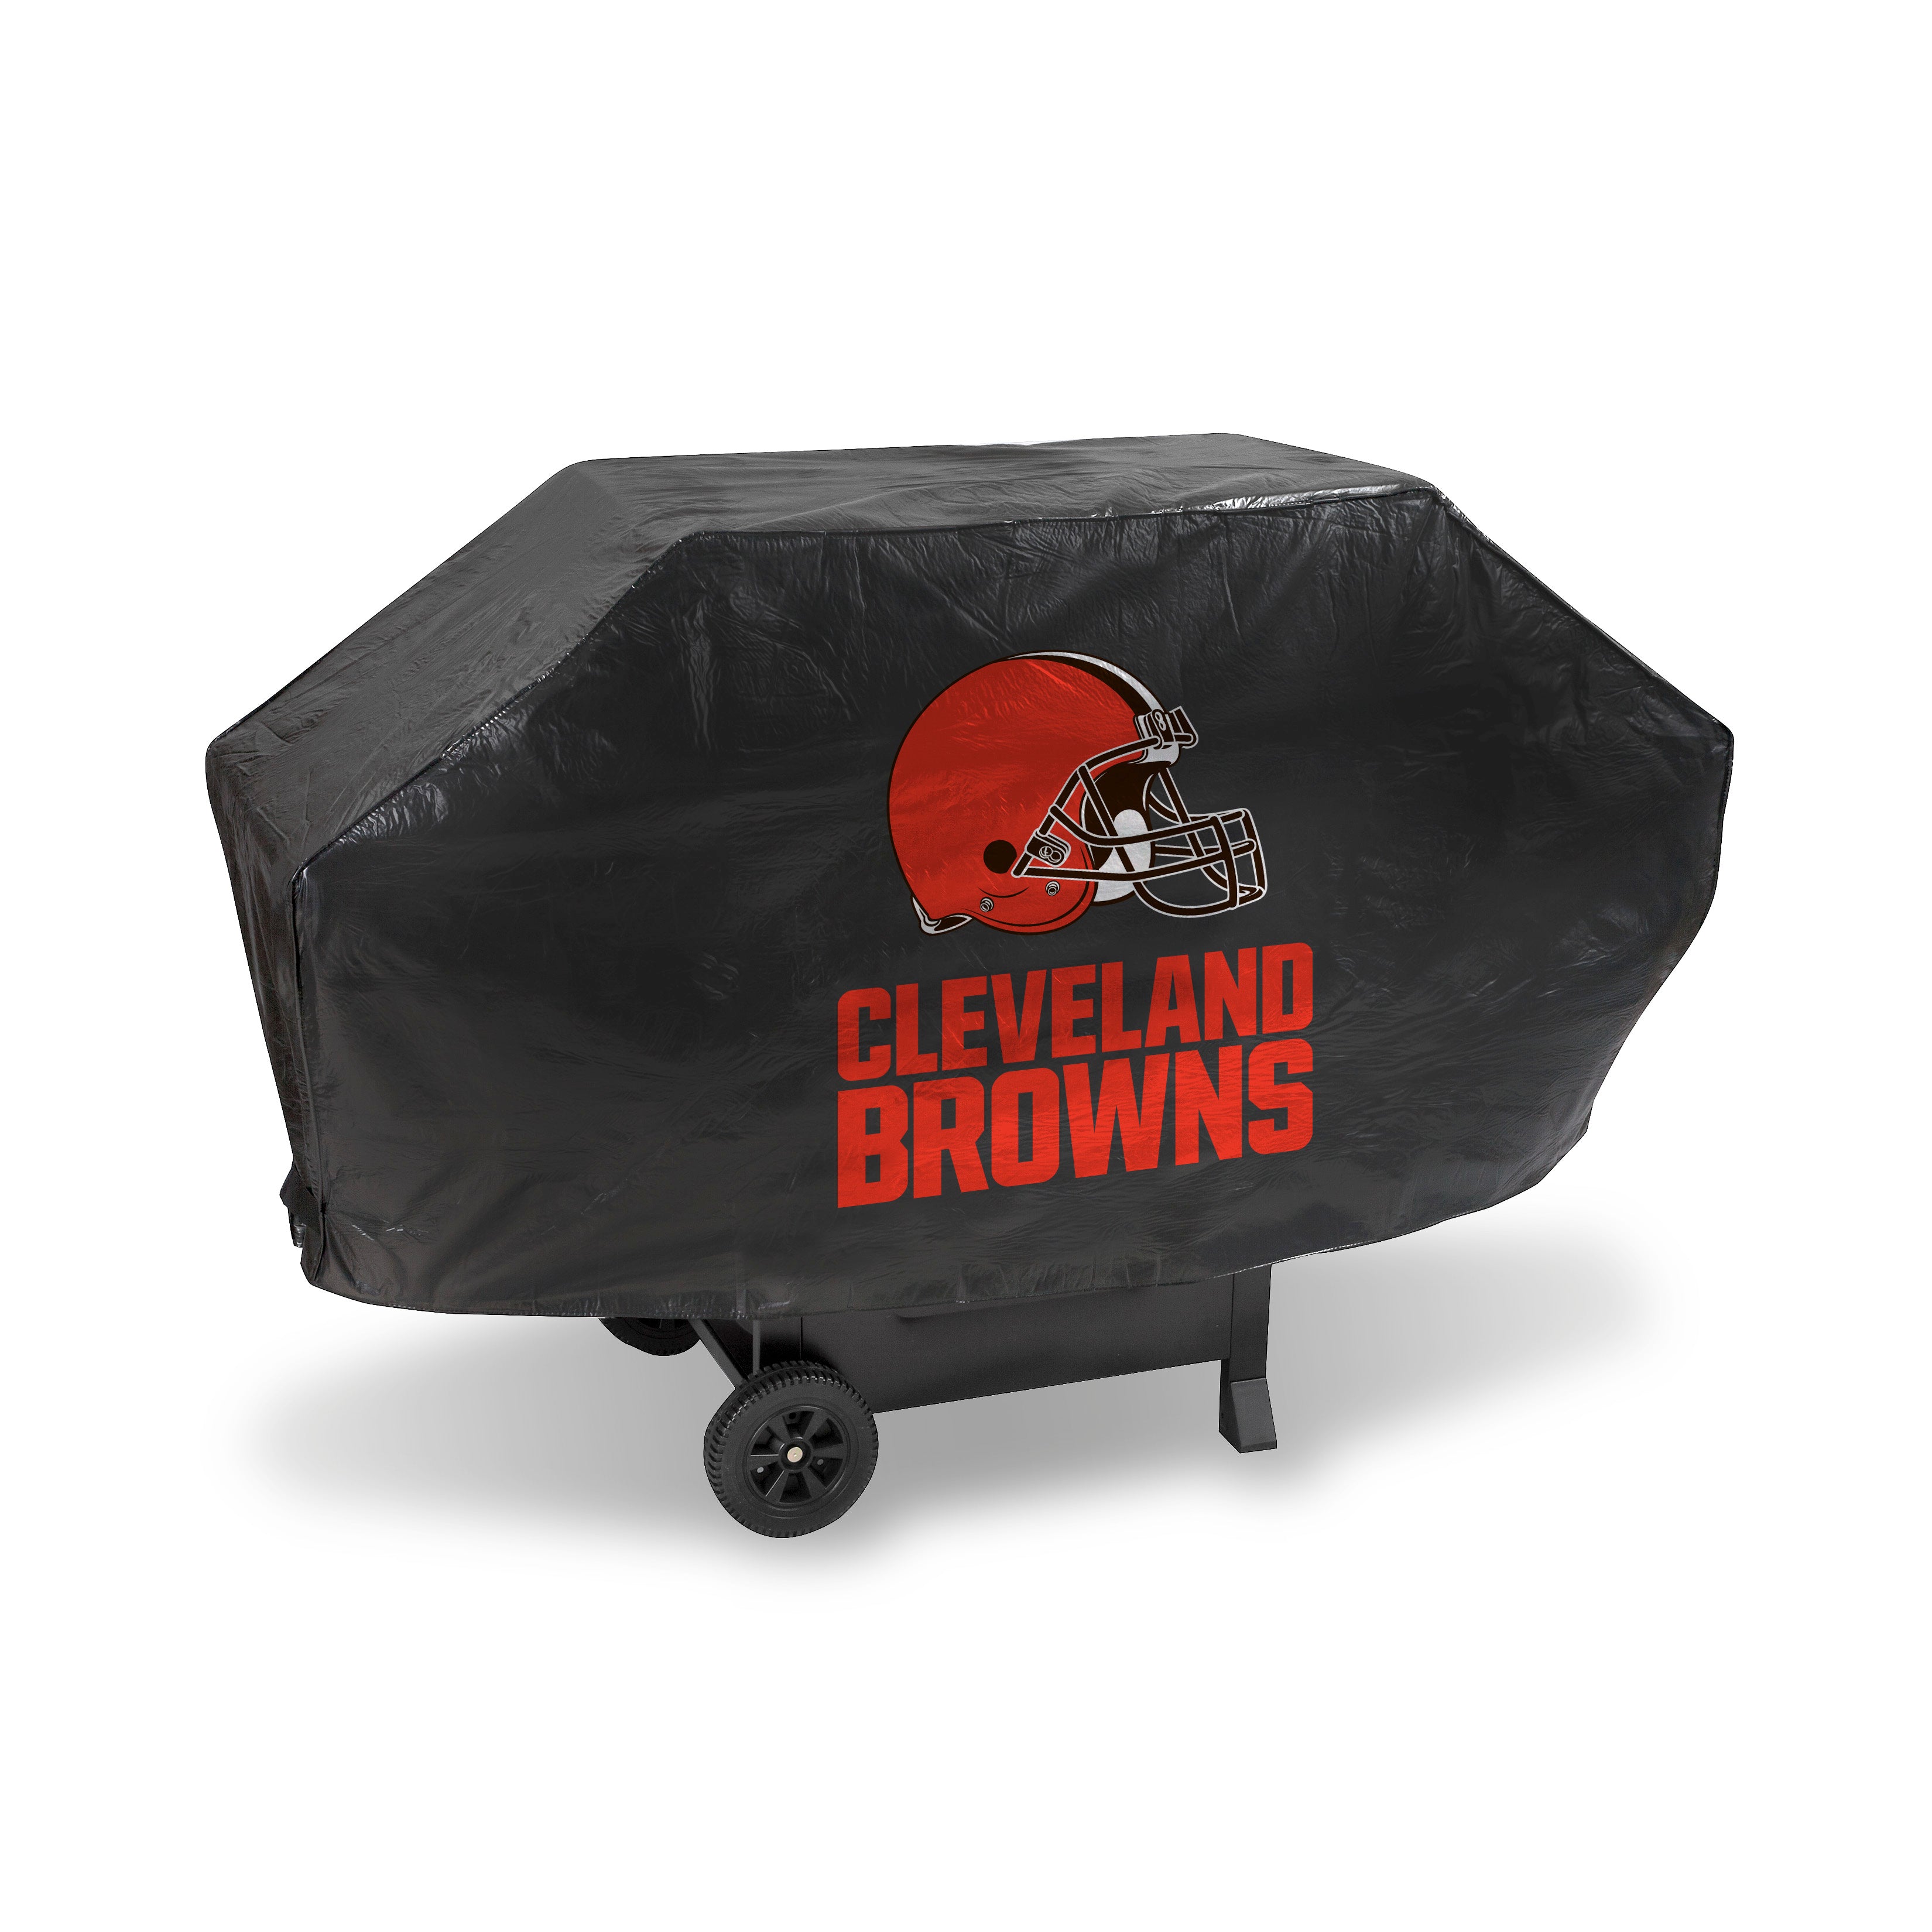 Cleveland Browns Grill Cover (Deluxe Vinyl)